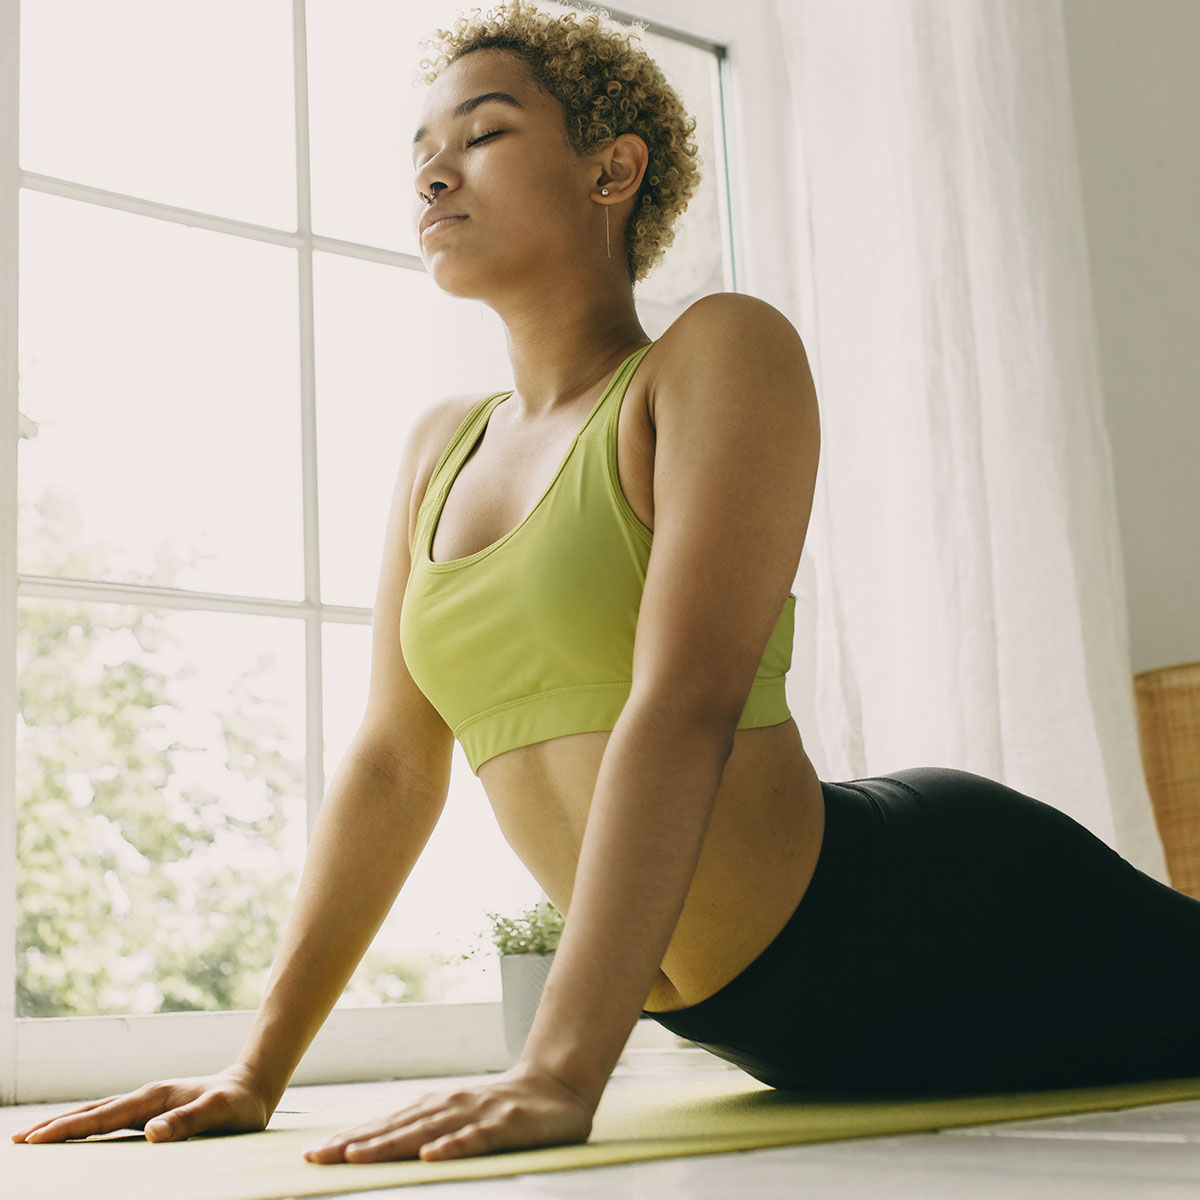 5 Easy Yoga Moves To Target Visceral Fat And Build Core Strength